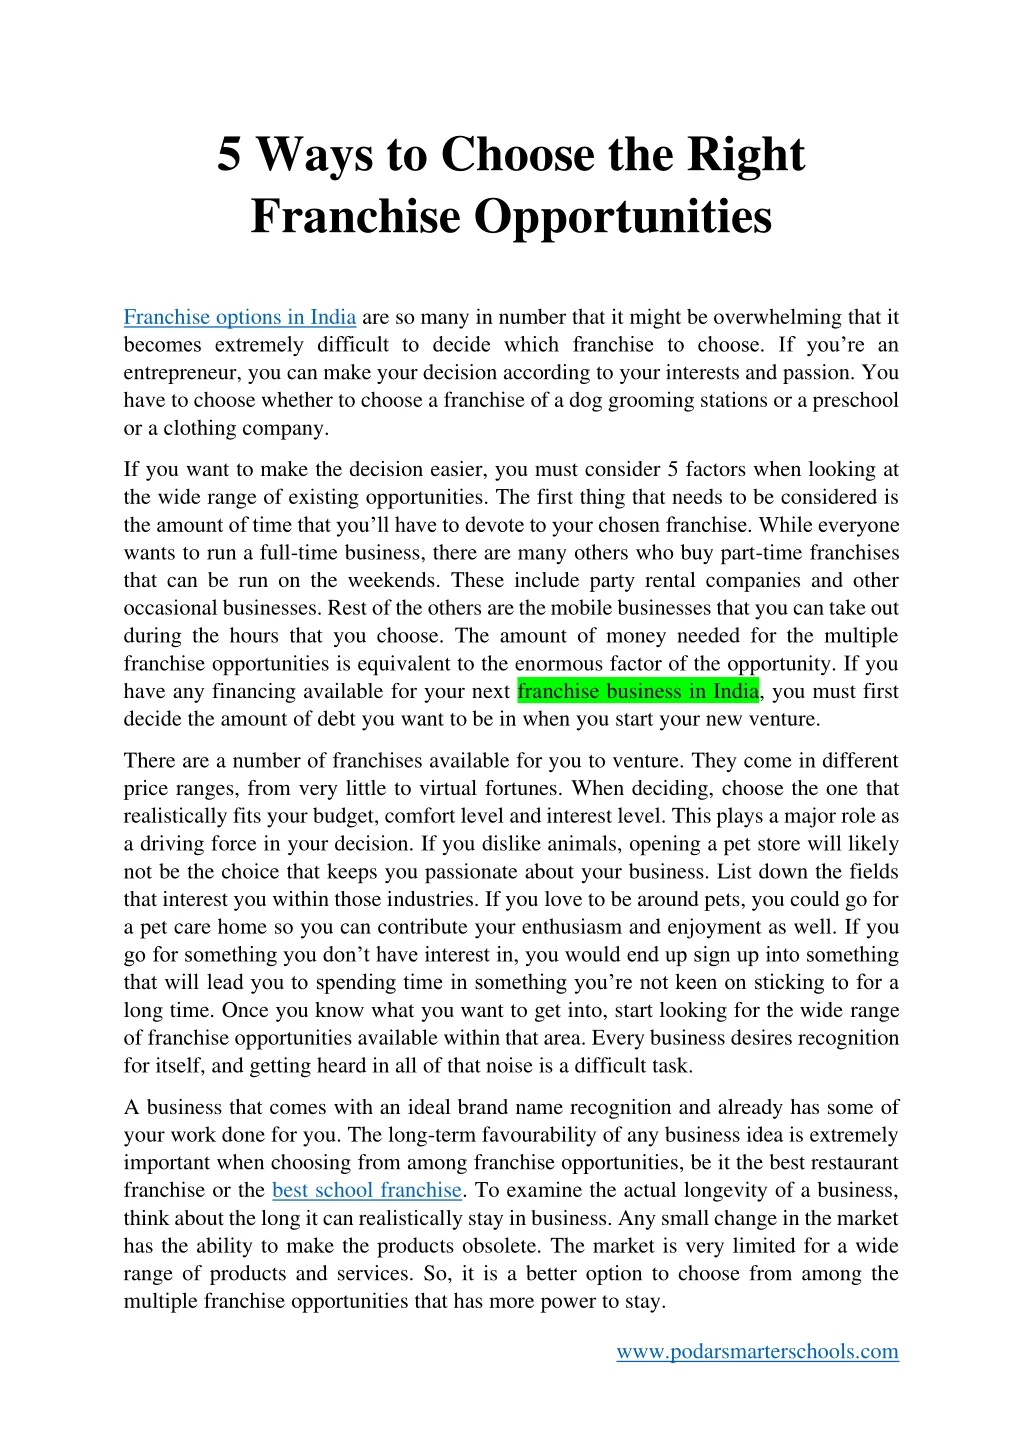 5 ways to choose the right franchise opportunities